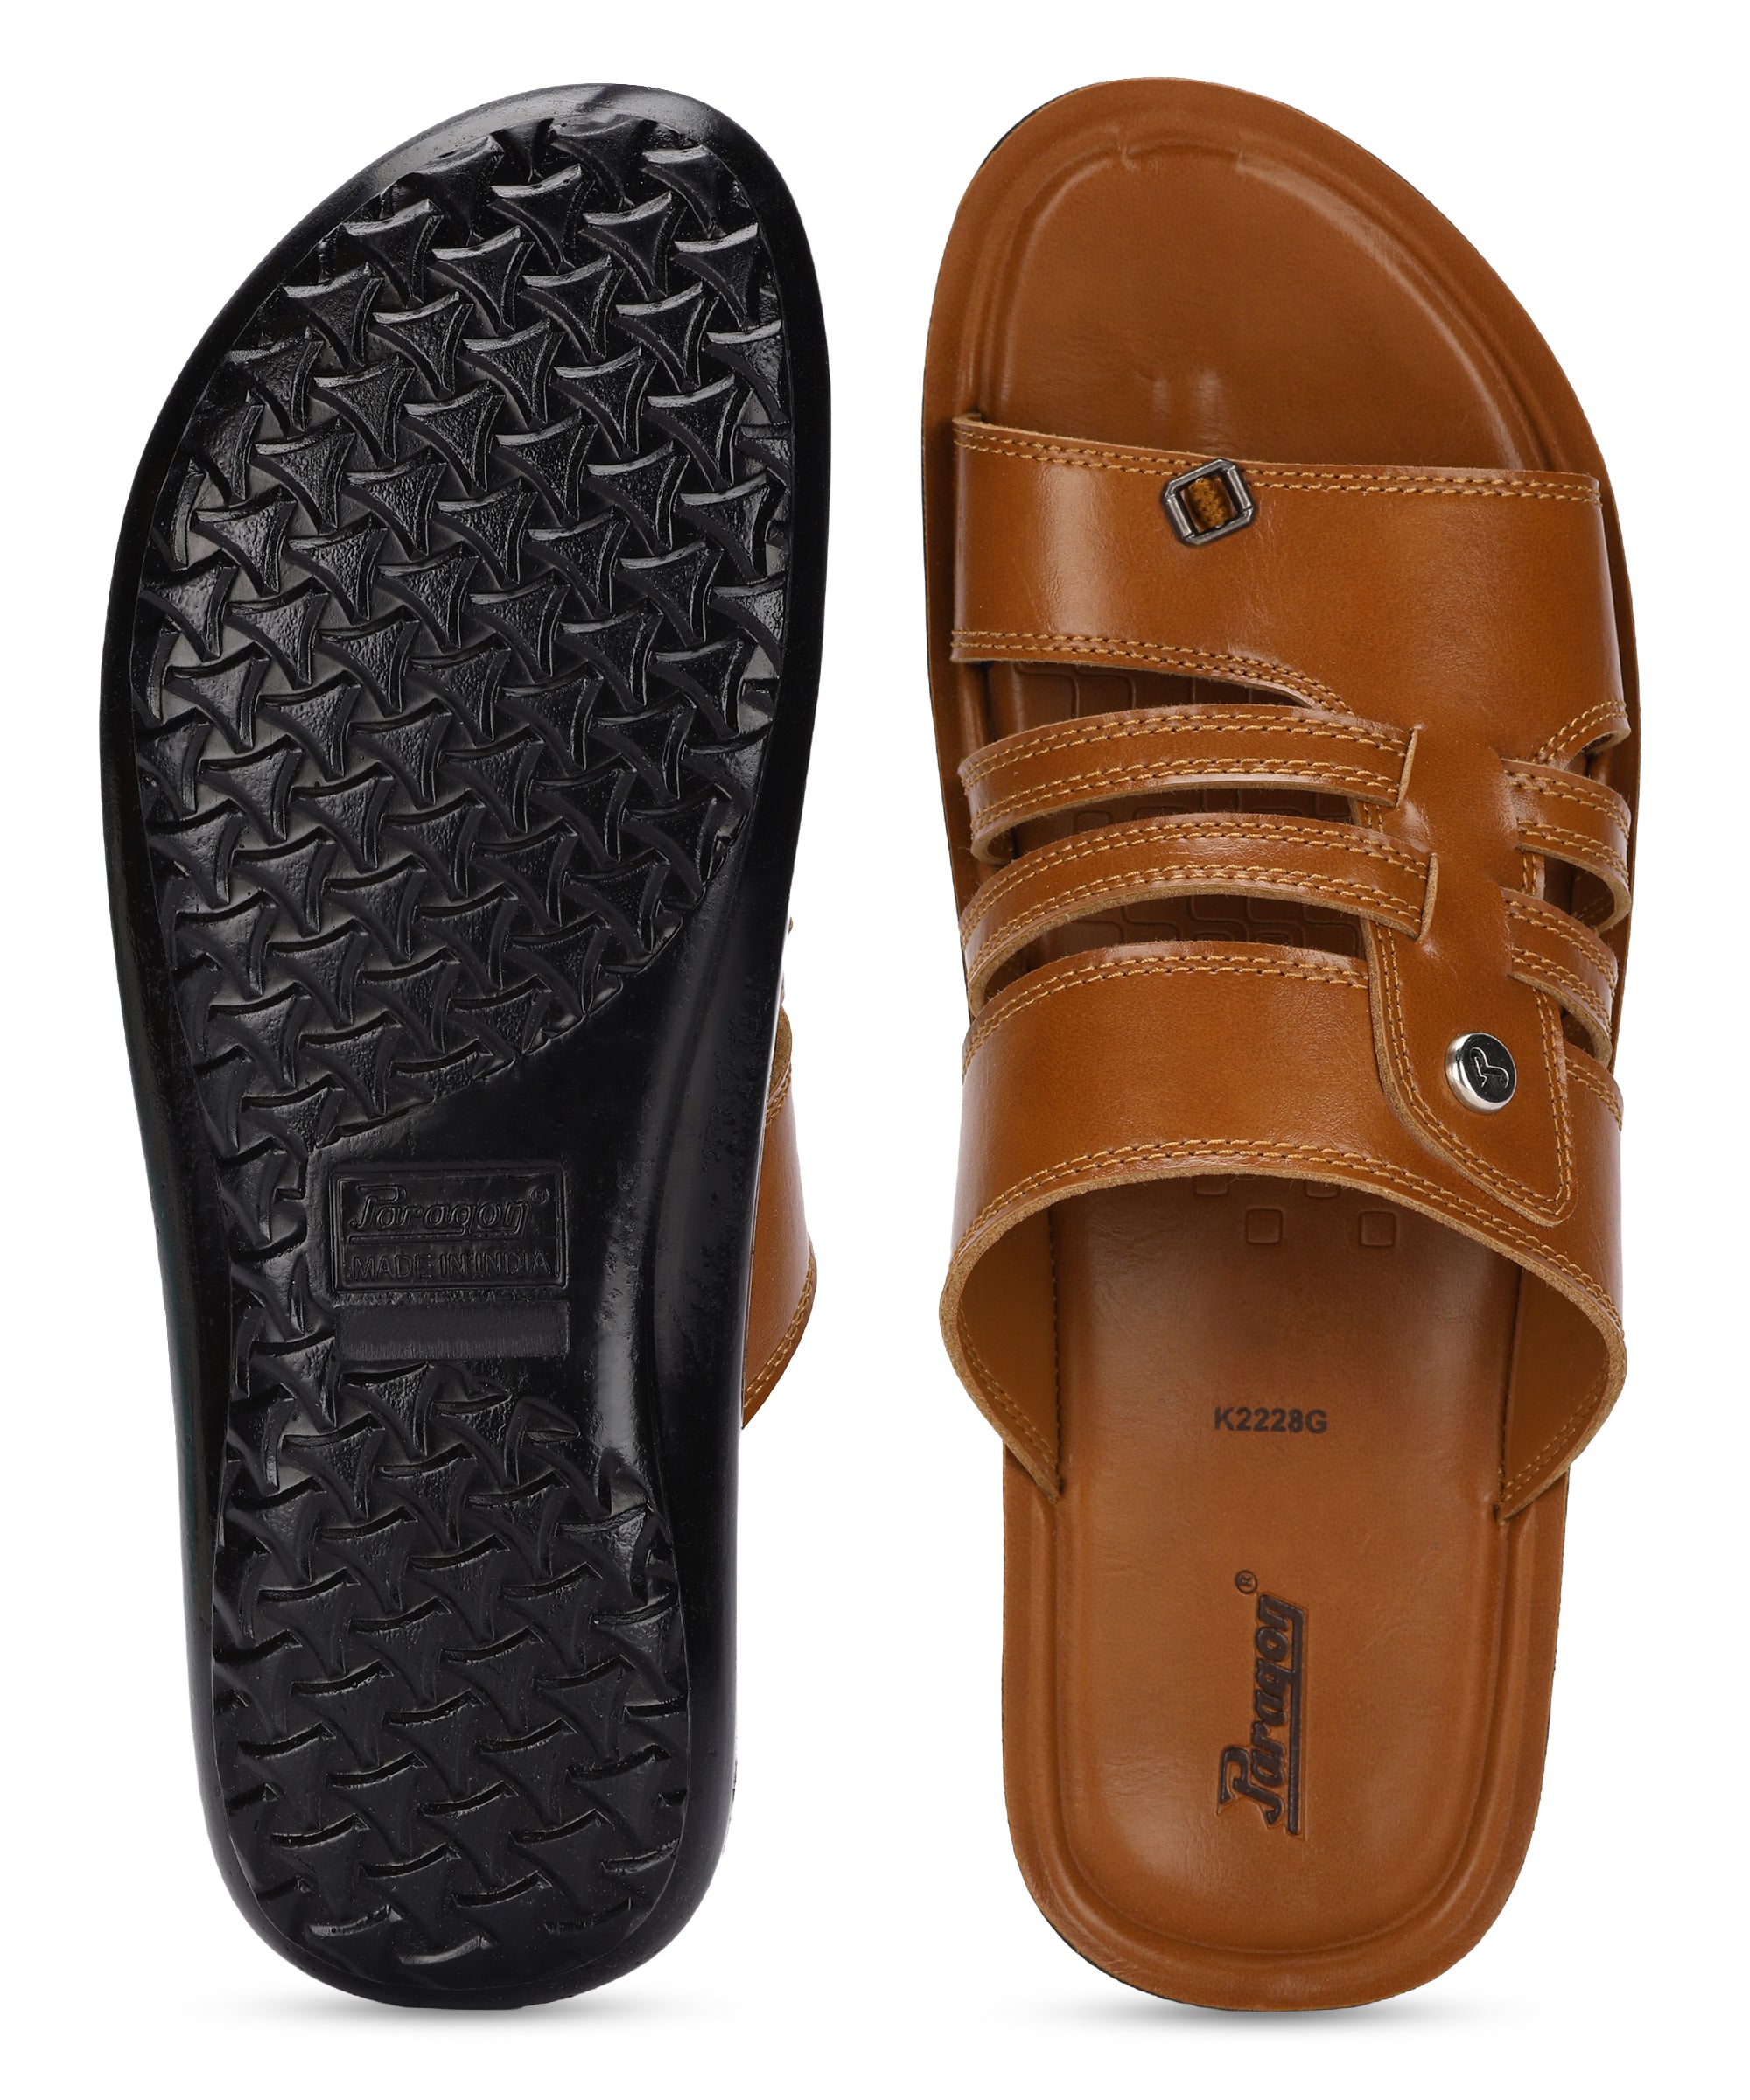 Aqualite Red Grey Men Leather Sandal - Get Best Price from Manufacturers &  Suppliers in India